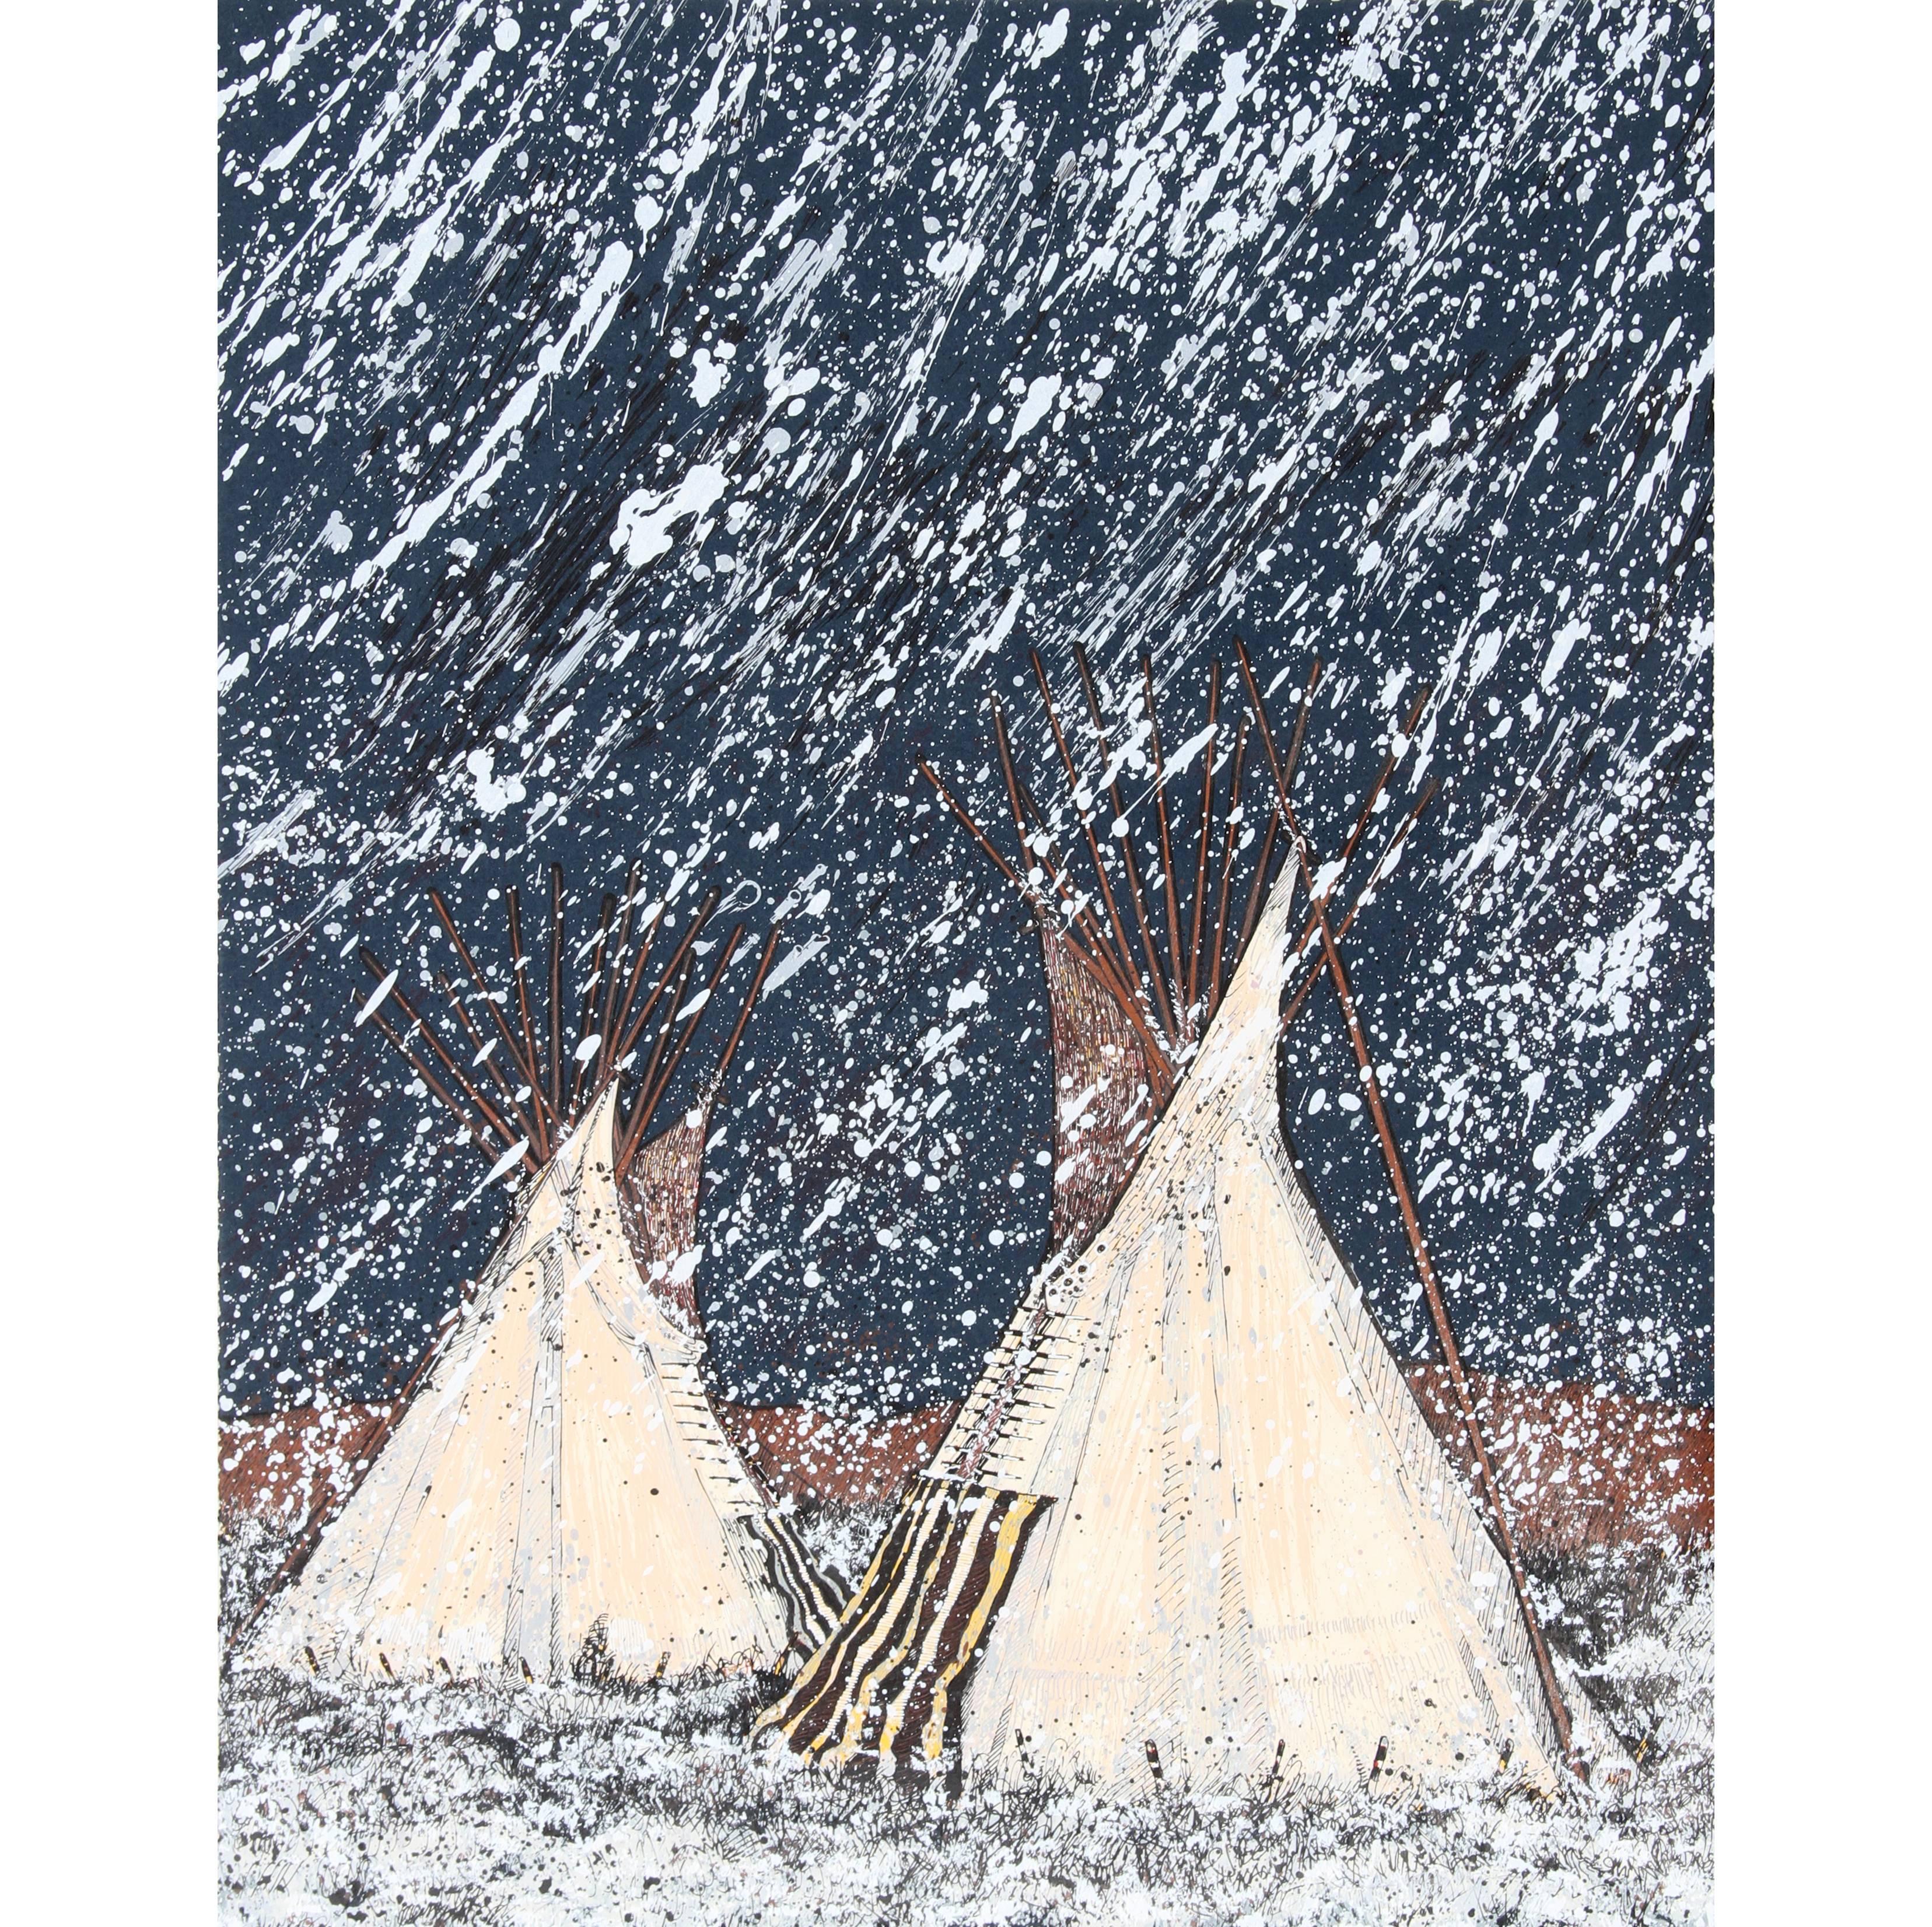 Artist: Kevin Red Star, American (1942 - )
Title: First Snow
Year: Circa 1980
Medium: Serigraph, signed and numbered in pencil
Edition: 150, AP
Size: 30 in. x 22 in. (76.2 cm x 55.88 cm)